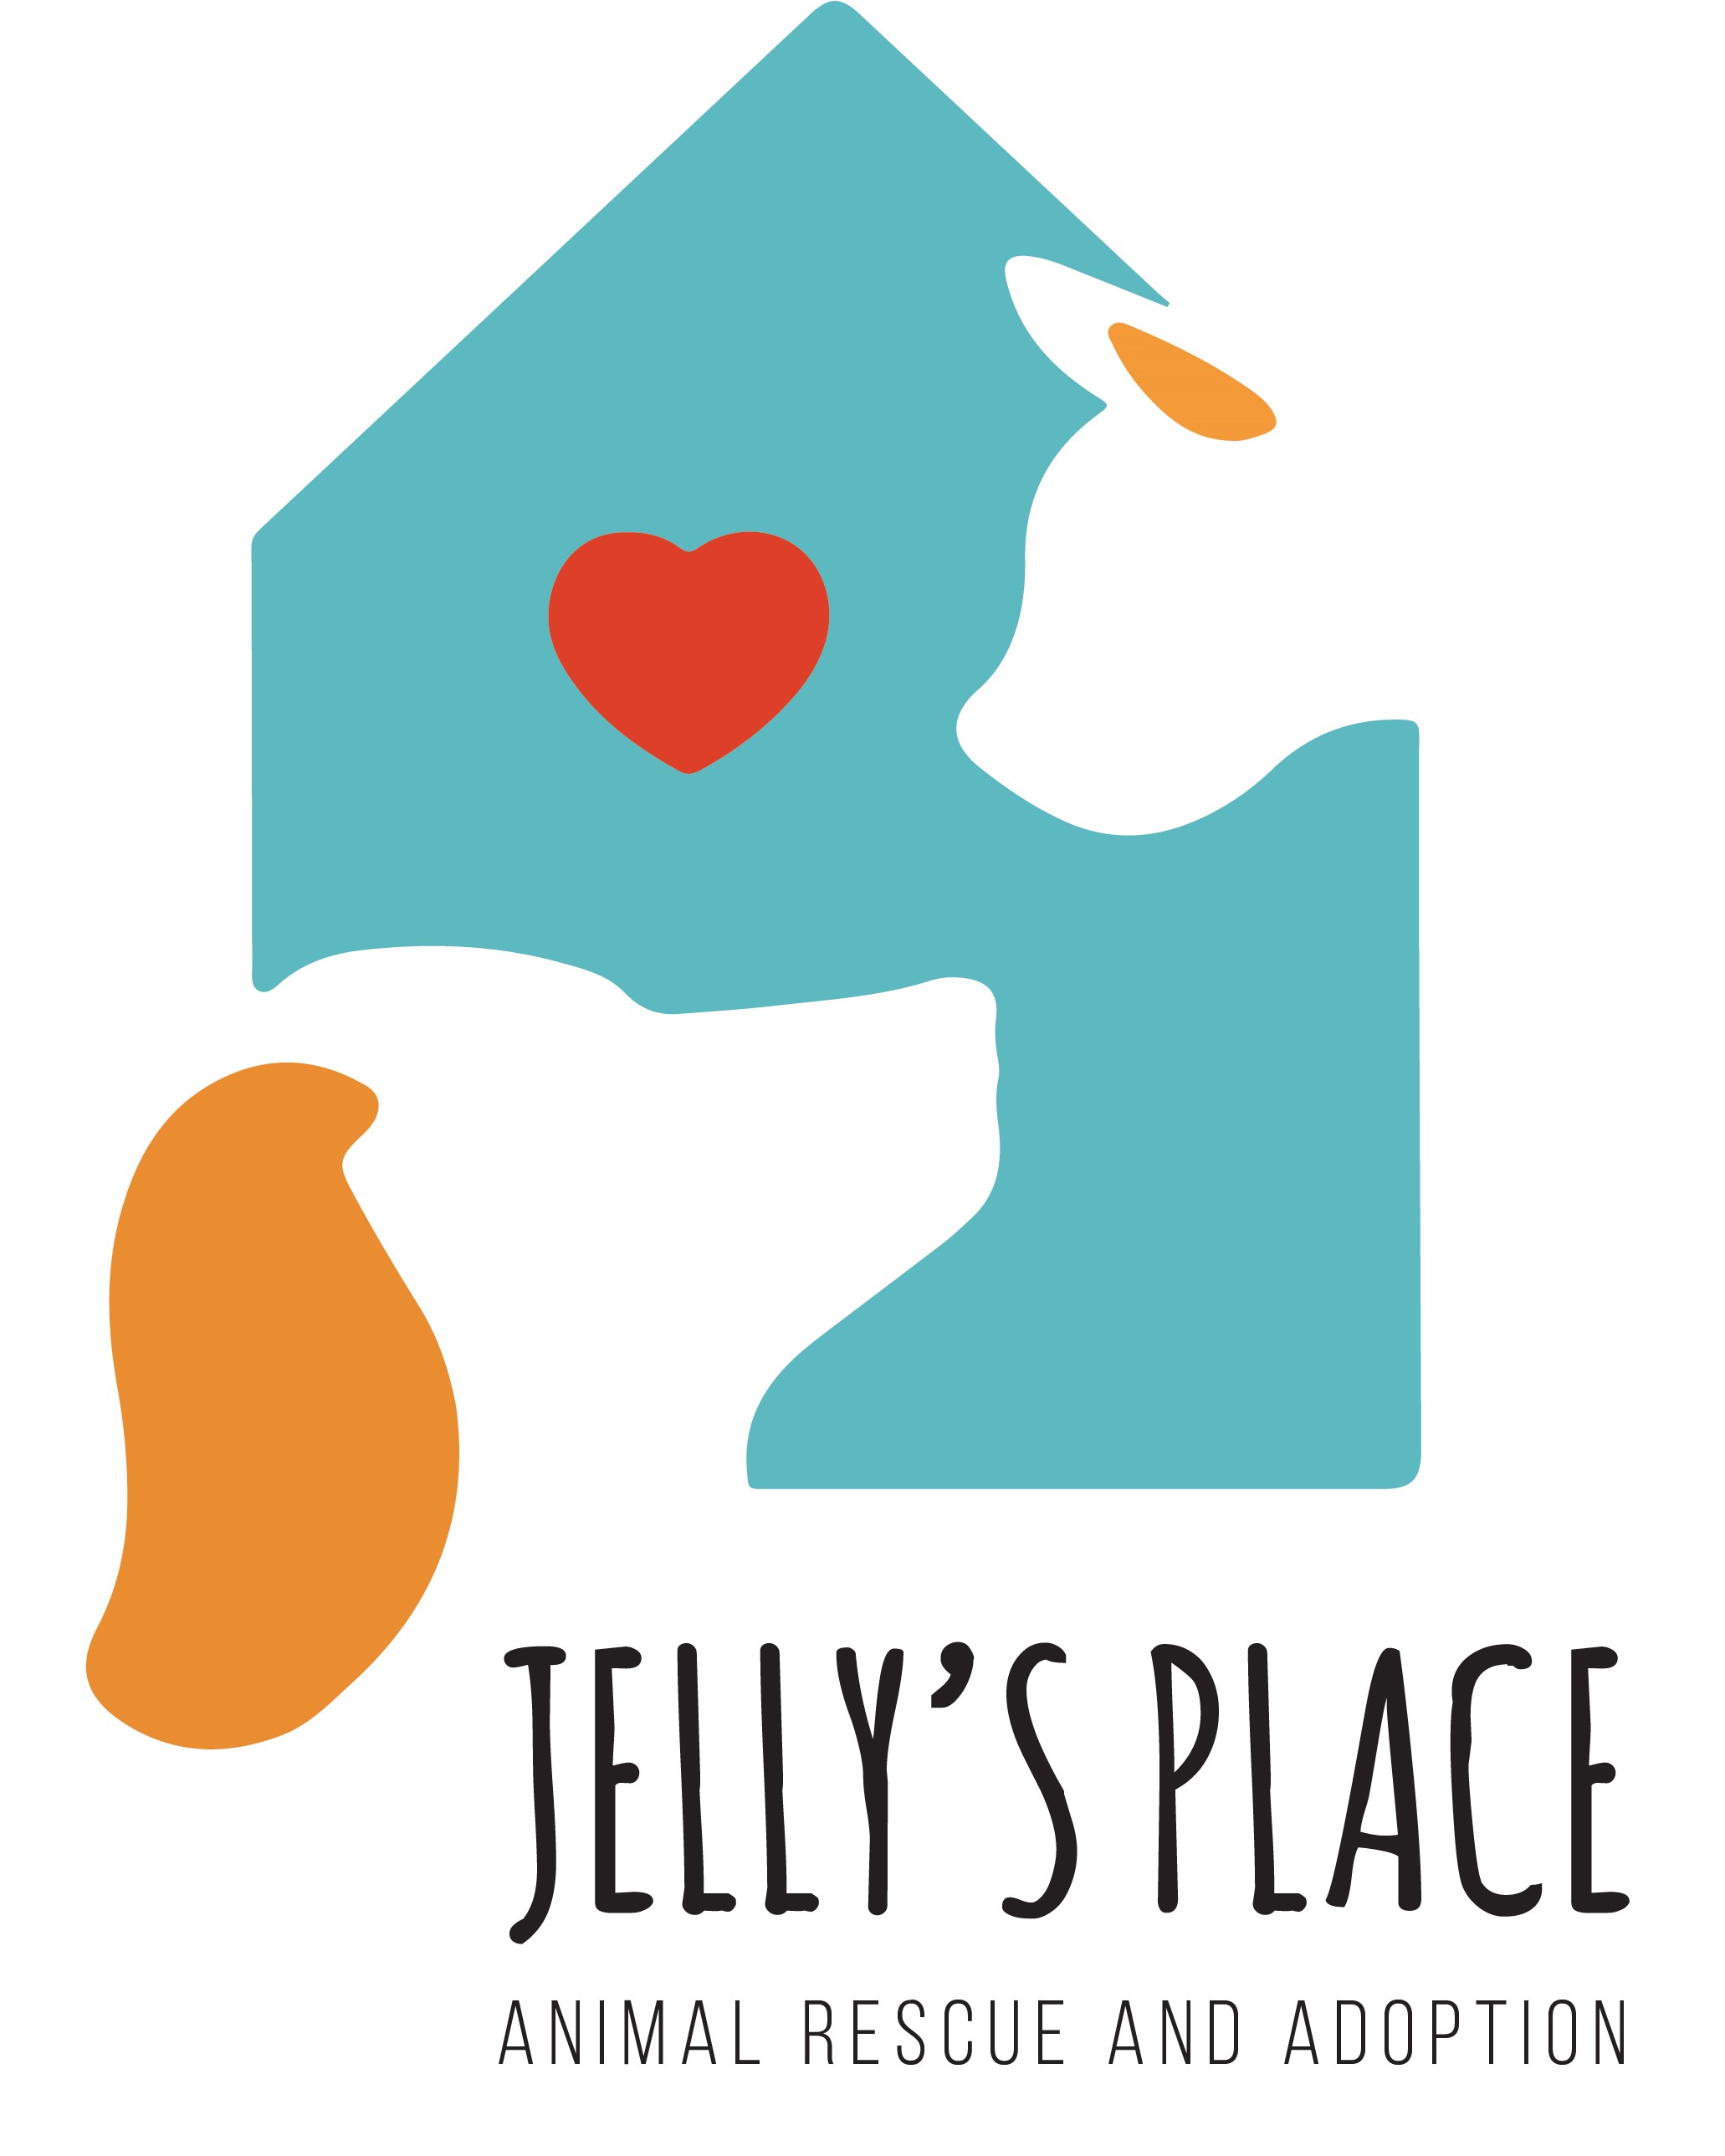 Jelly's place animal rescue logo